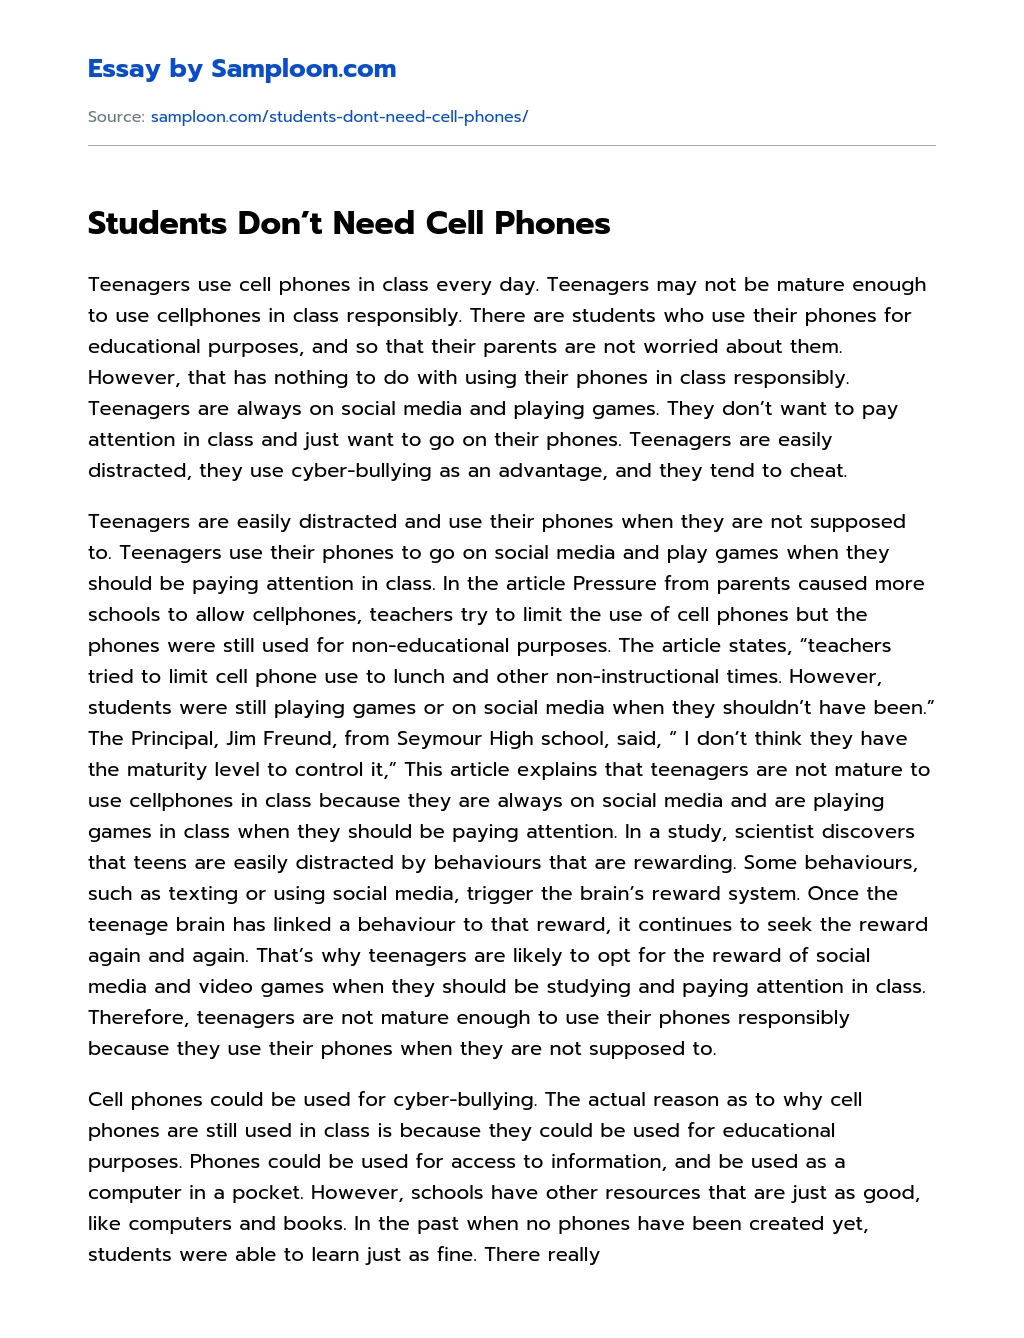 Students Don’t Need Cell Phones essay